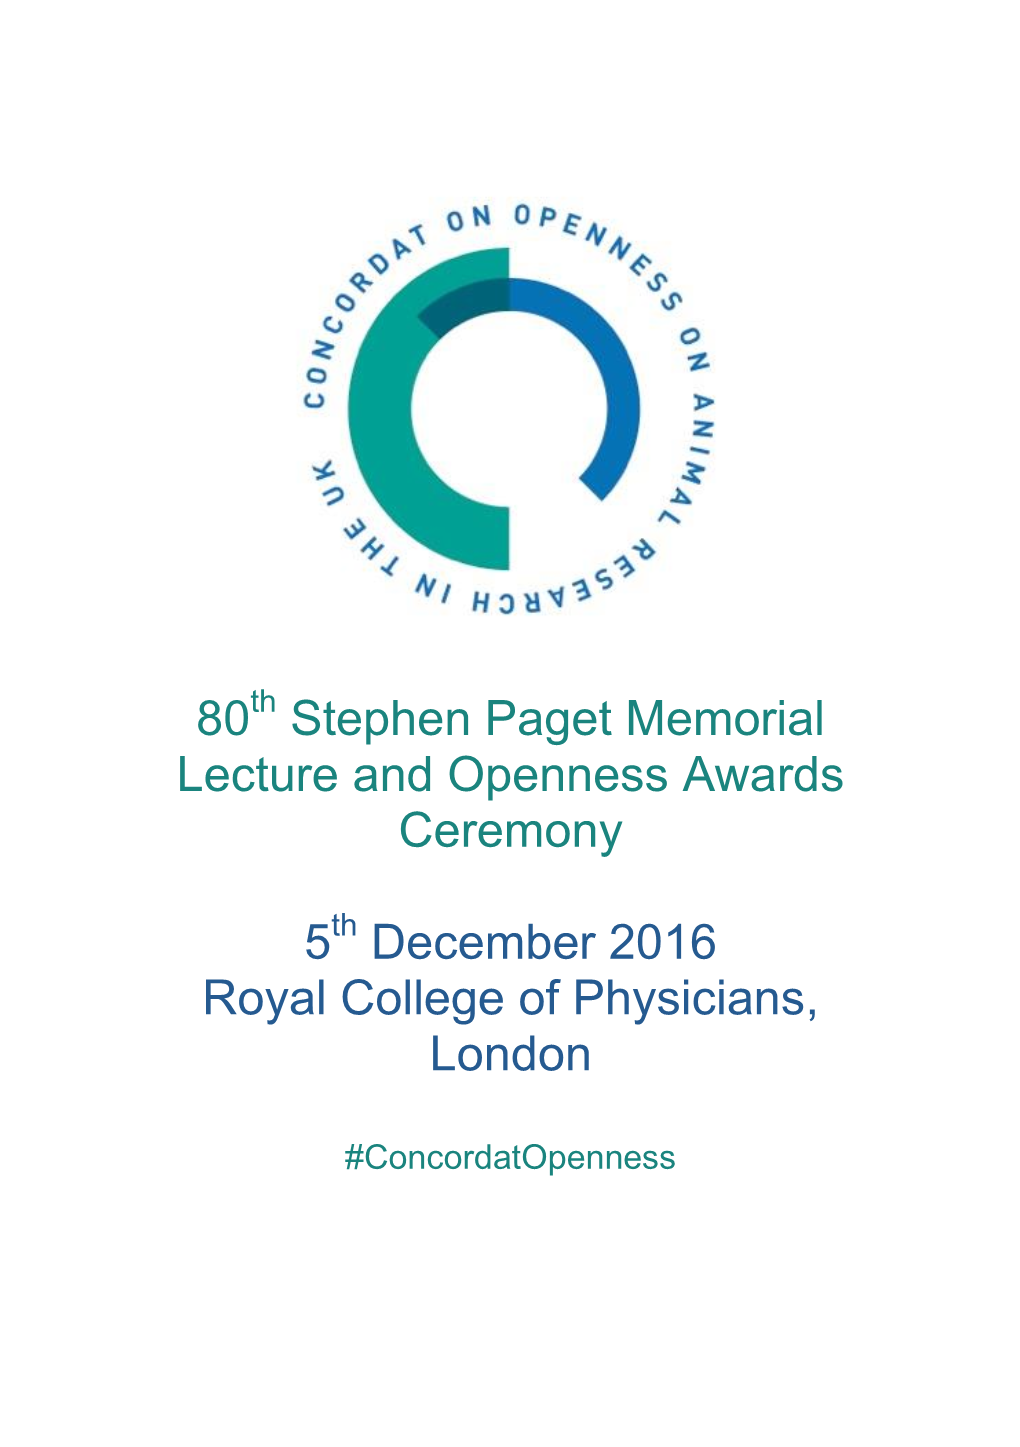 80 Stephen Paget Memorial Lecture and Openness Awards Ceremony 5